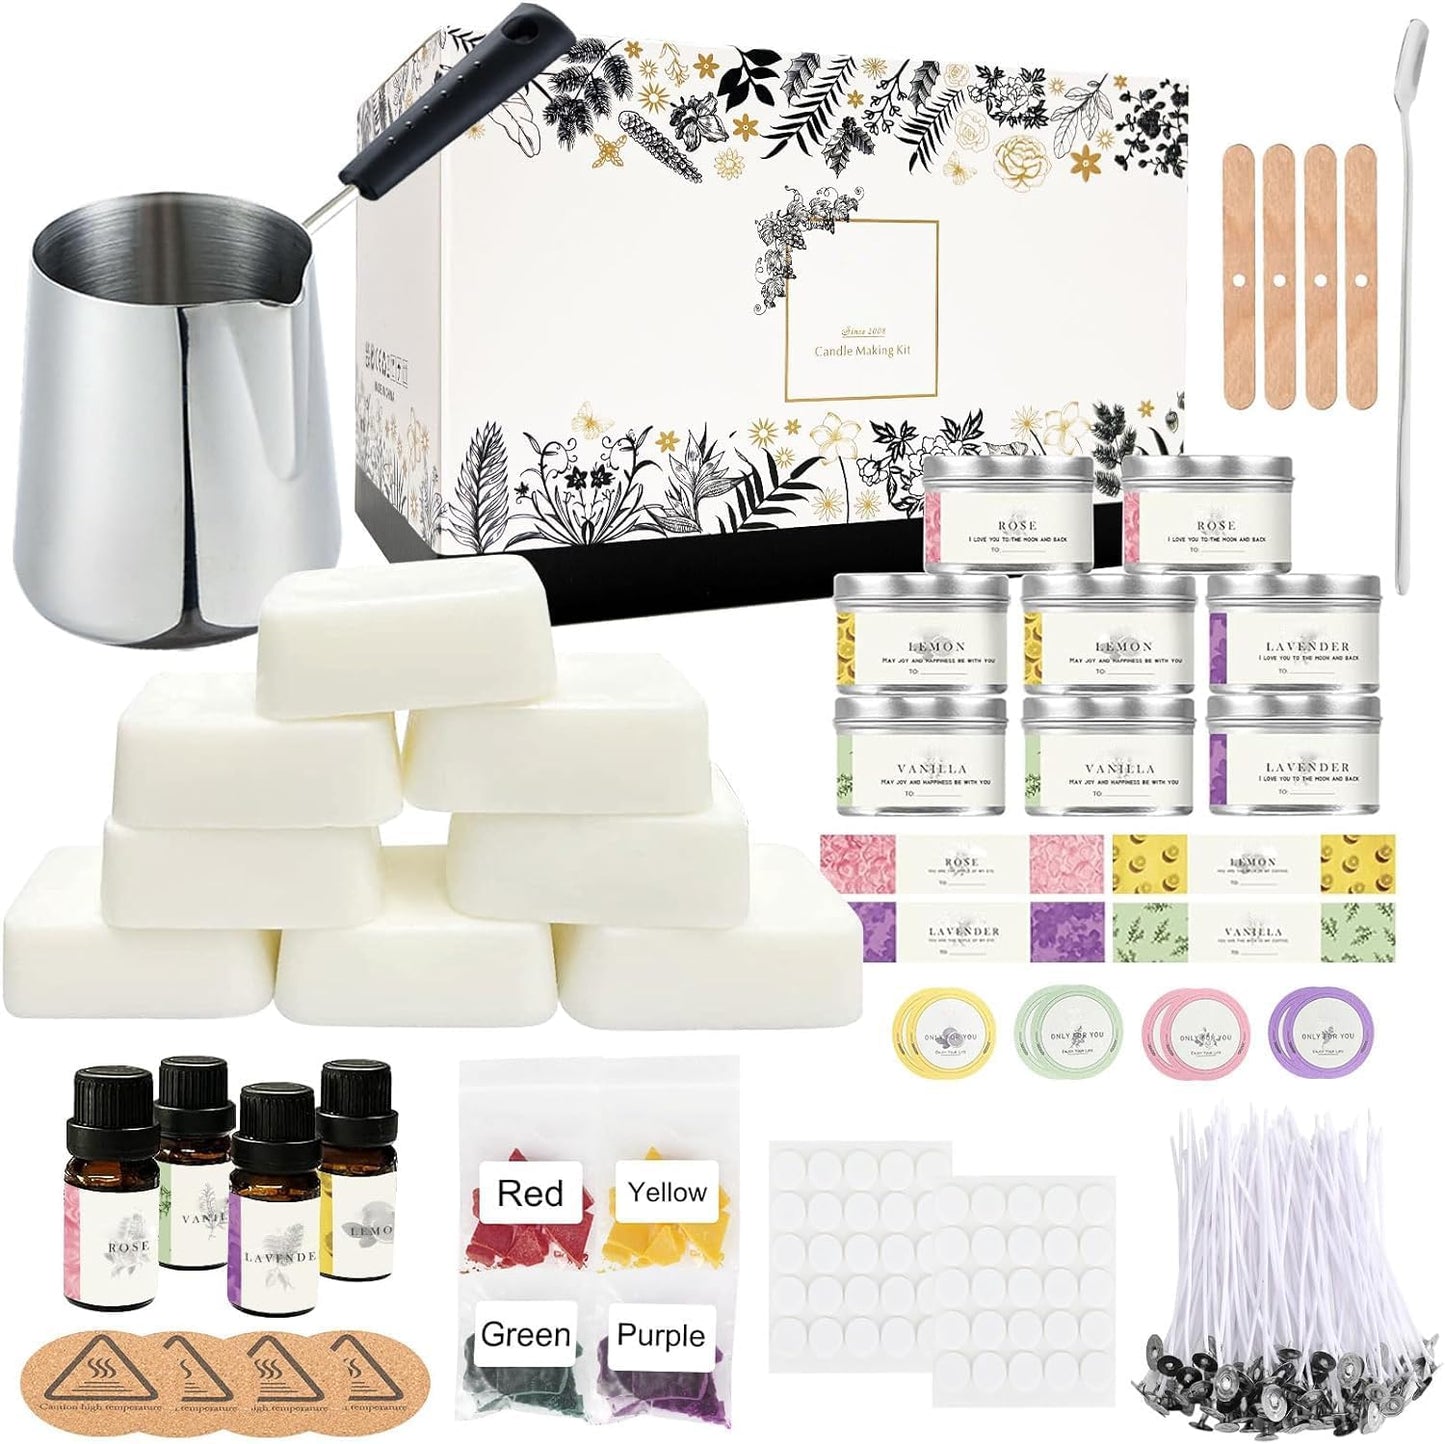 Complete Candle Making Kits for Adults Beginners,Diy Candle Making Supplies Include Soy Wax,Wax Melter,Scents,Dyes,Wicks,Wicks Sticker,Candle Tins & More-Full Candle Making Set - Arts & Crafts Kits